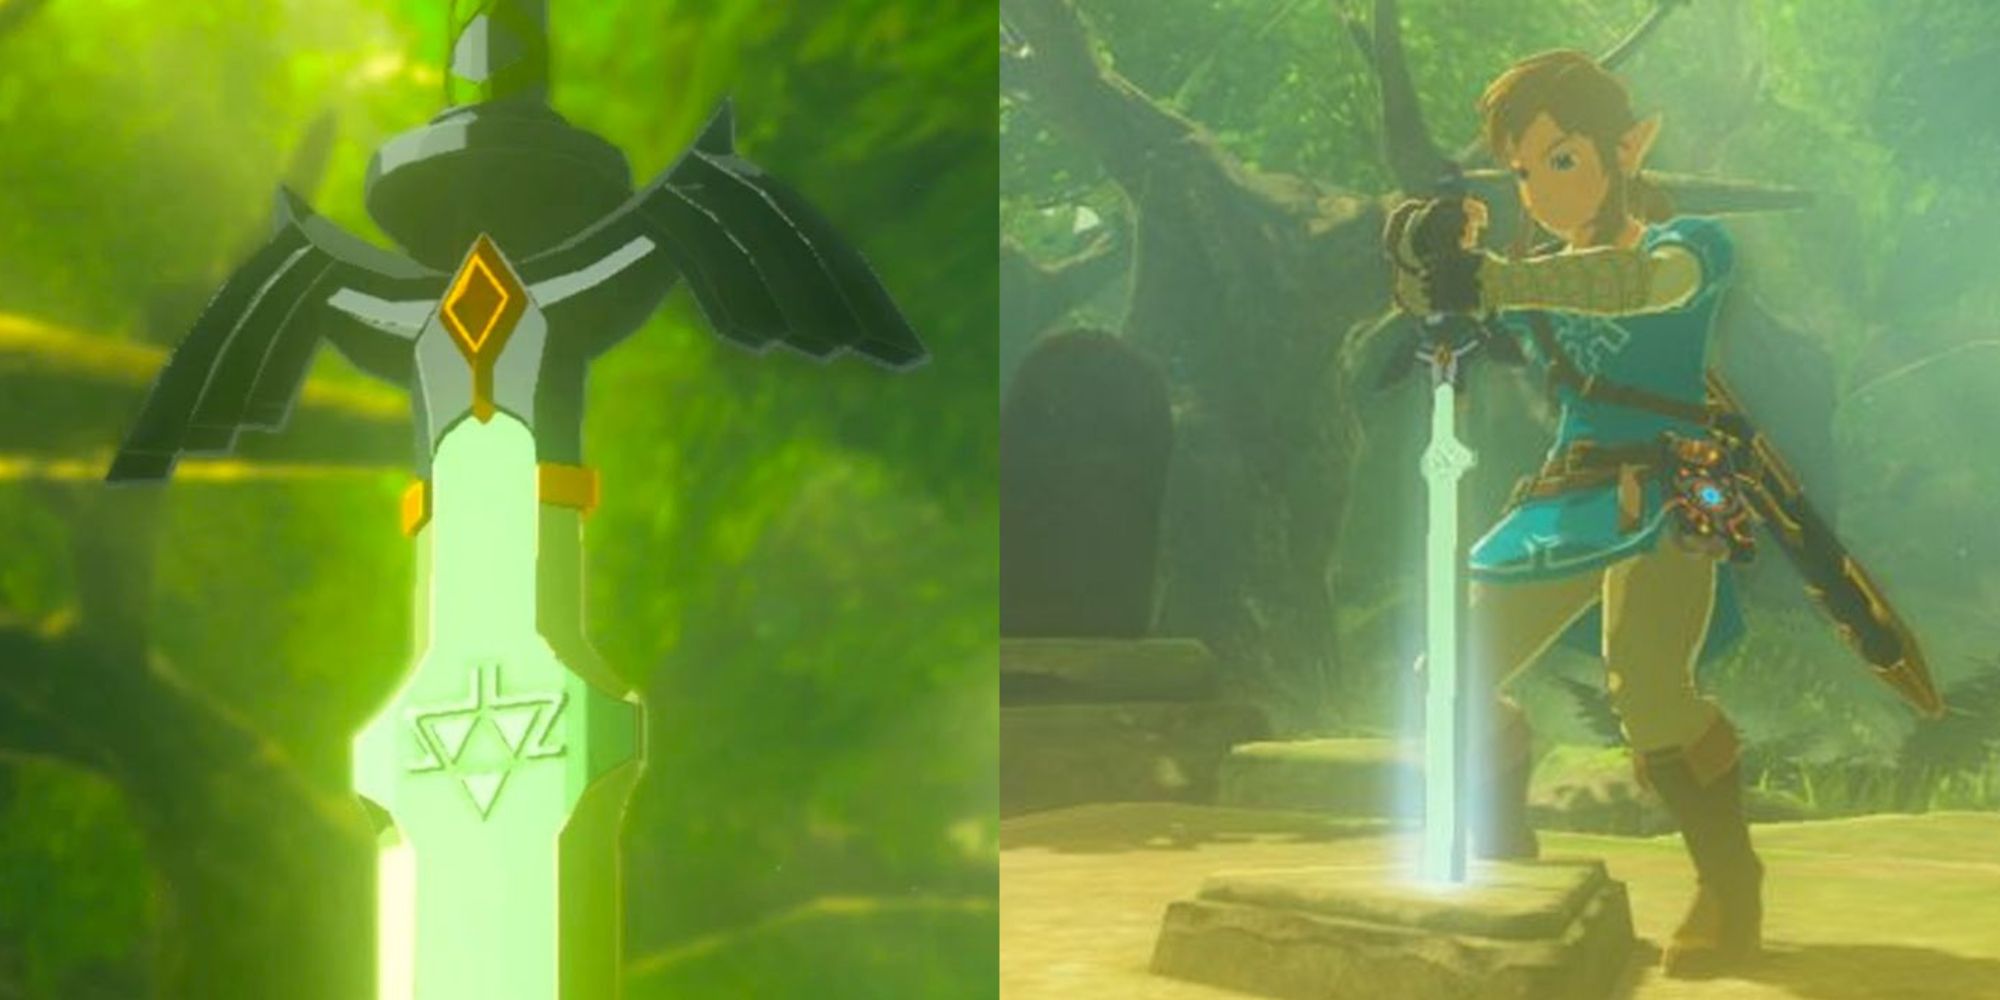 How to get the Master Sword in Zelda: Breath of the Wild - Polygon